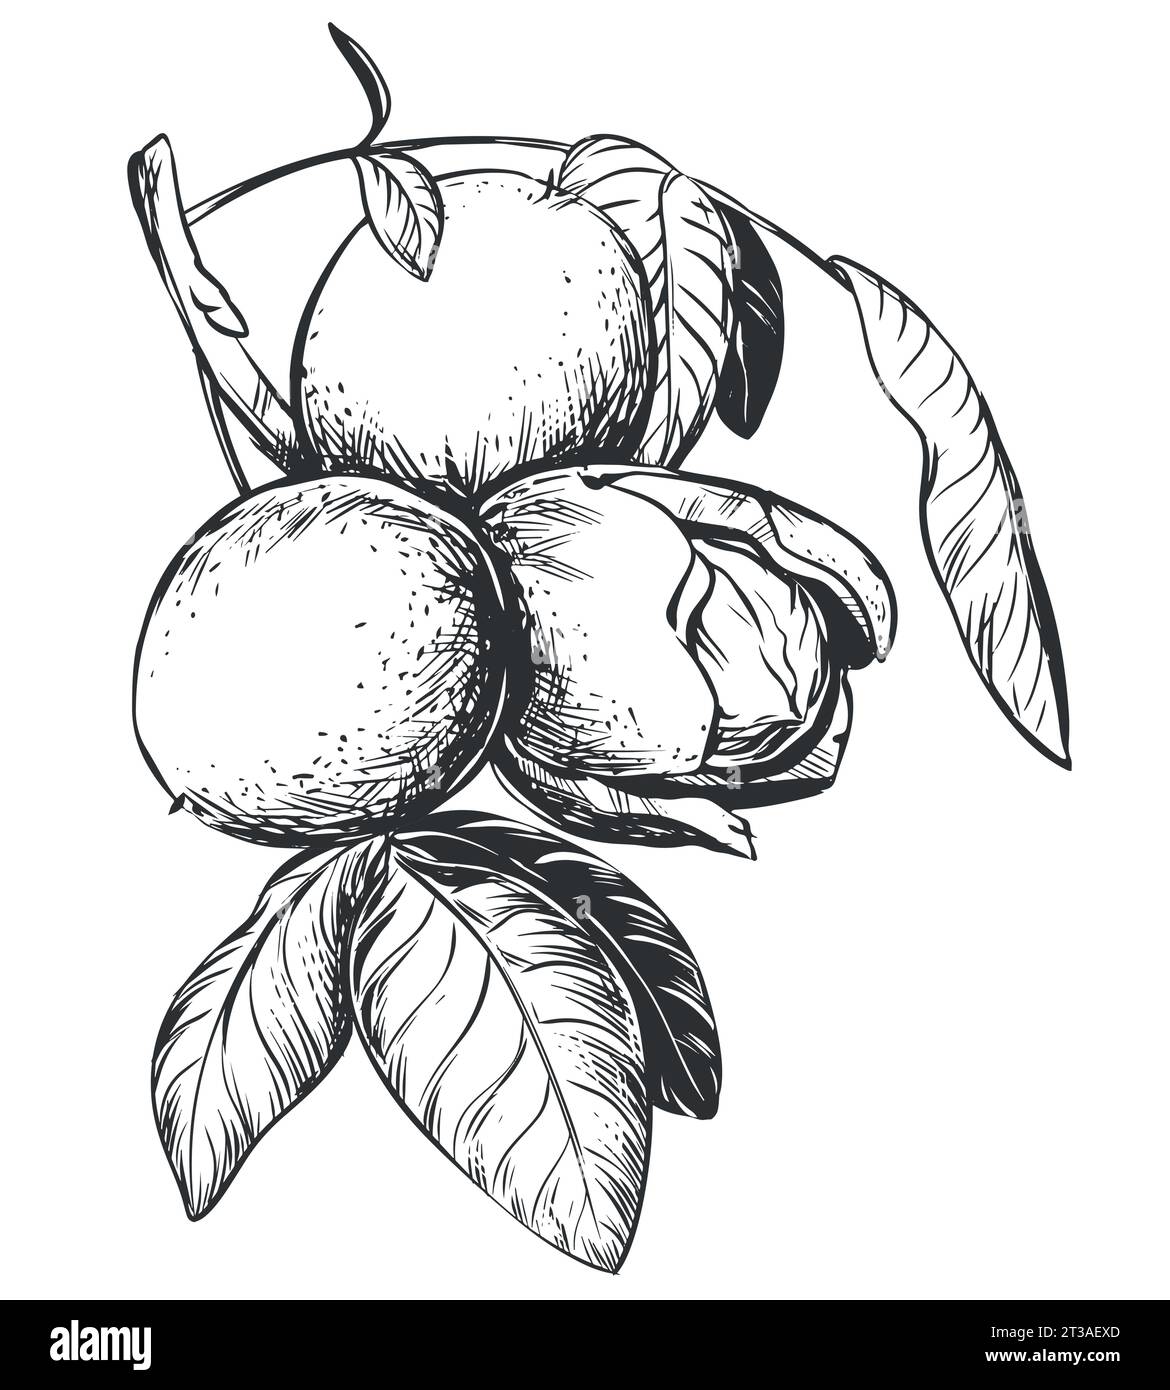 Walnuts are hand drawn. Vector illustration in engraving technique. Ingredient for nut paste, butter, Nocino liqueur. For packaging design. Linear ink Stock Vector